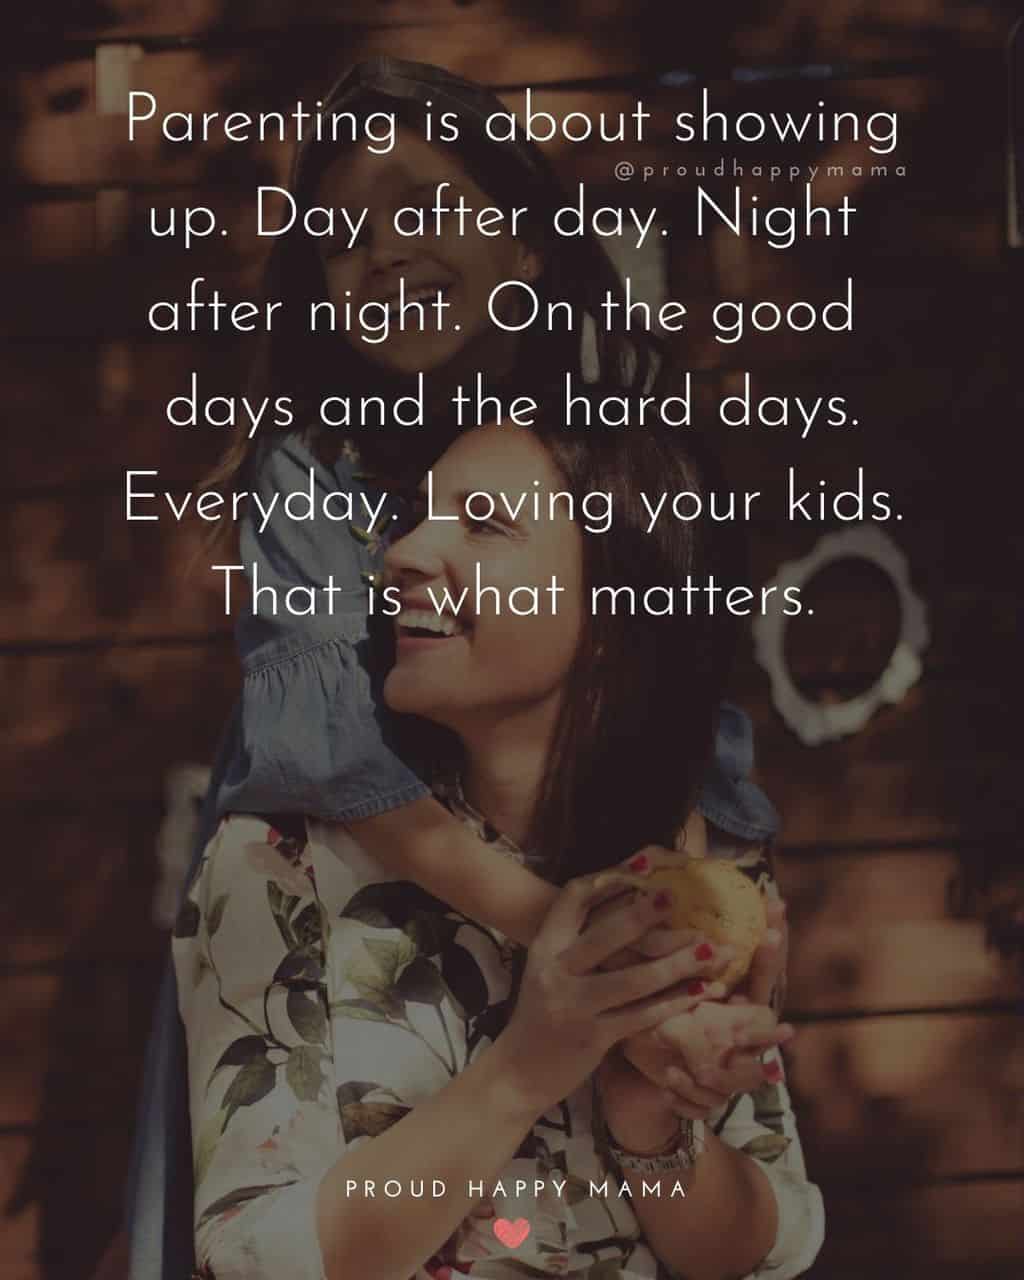 Parenting Quotes - Parenting is about showing up. Day after day. Night after night. On the good days and the hard days. Everyday.